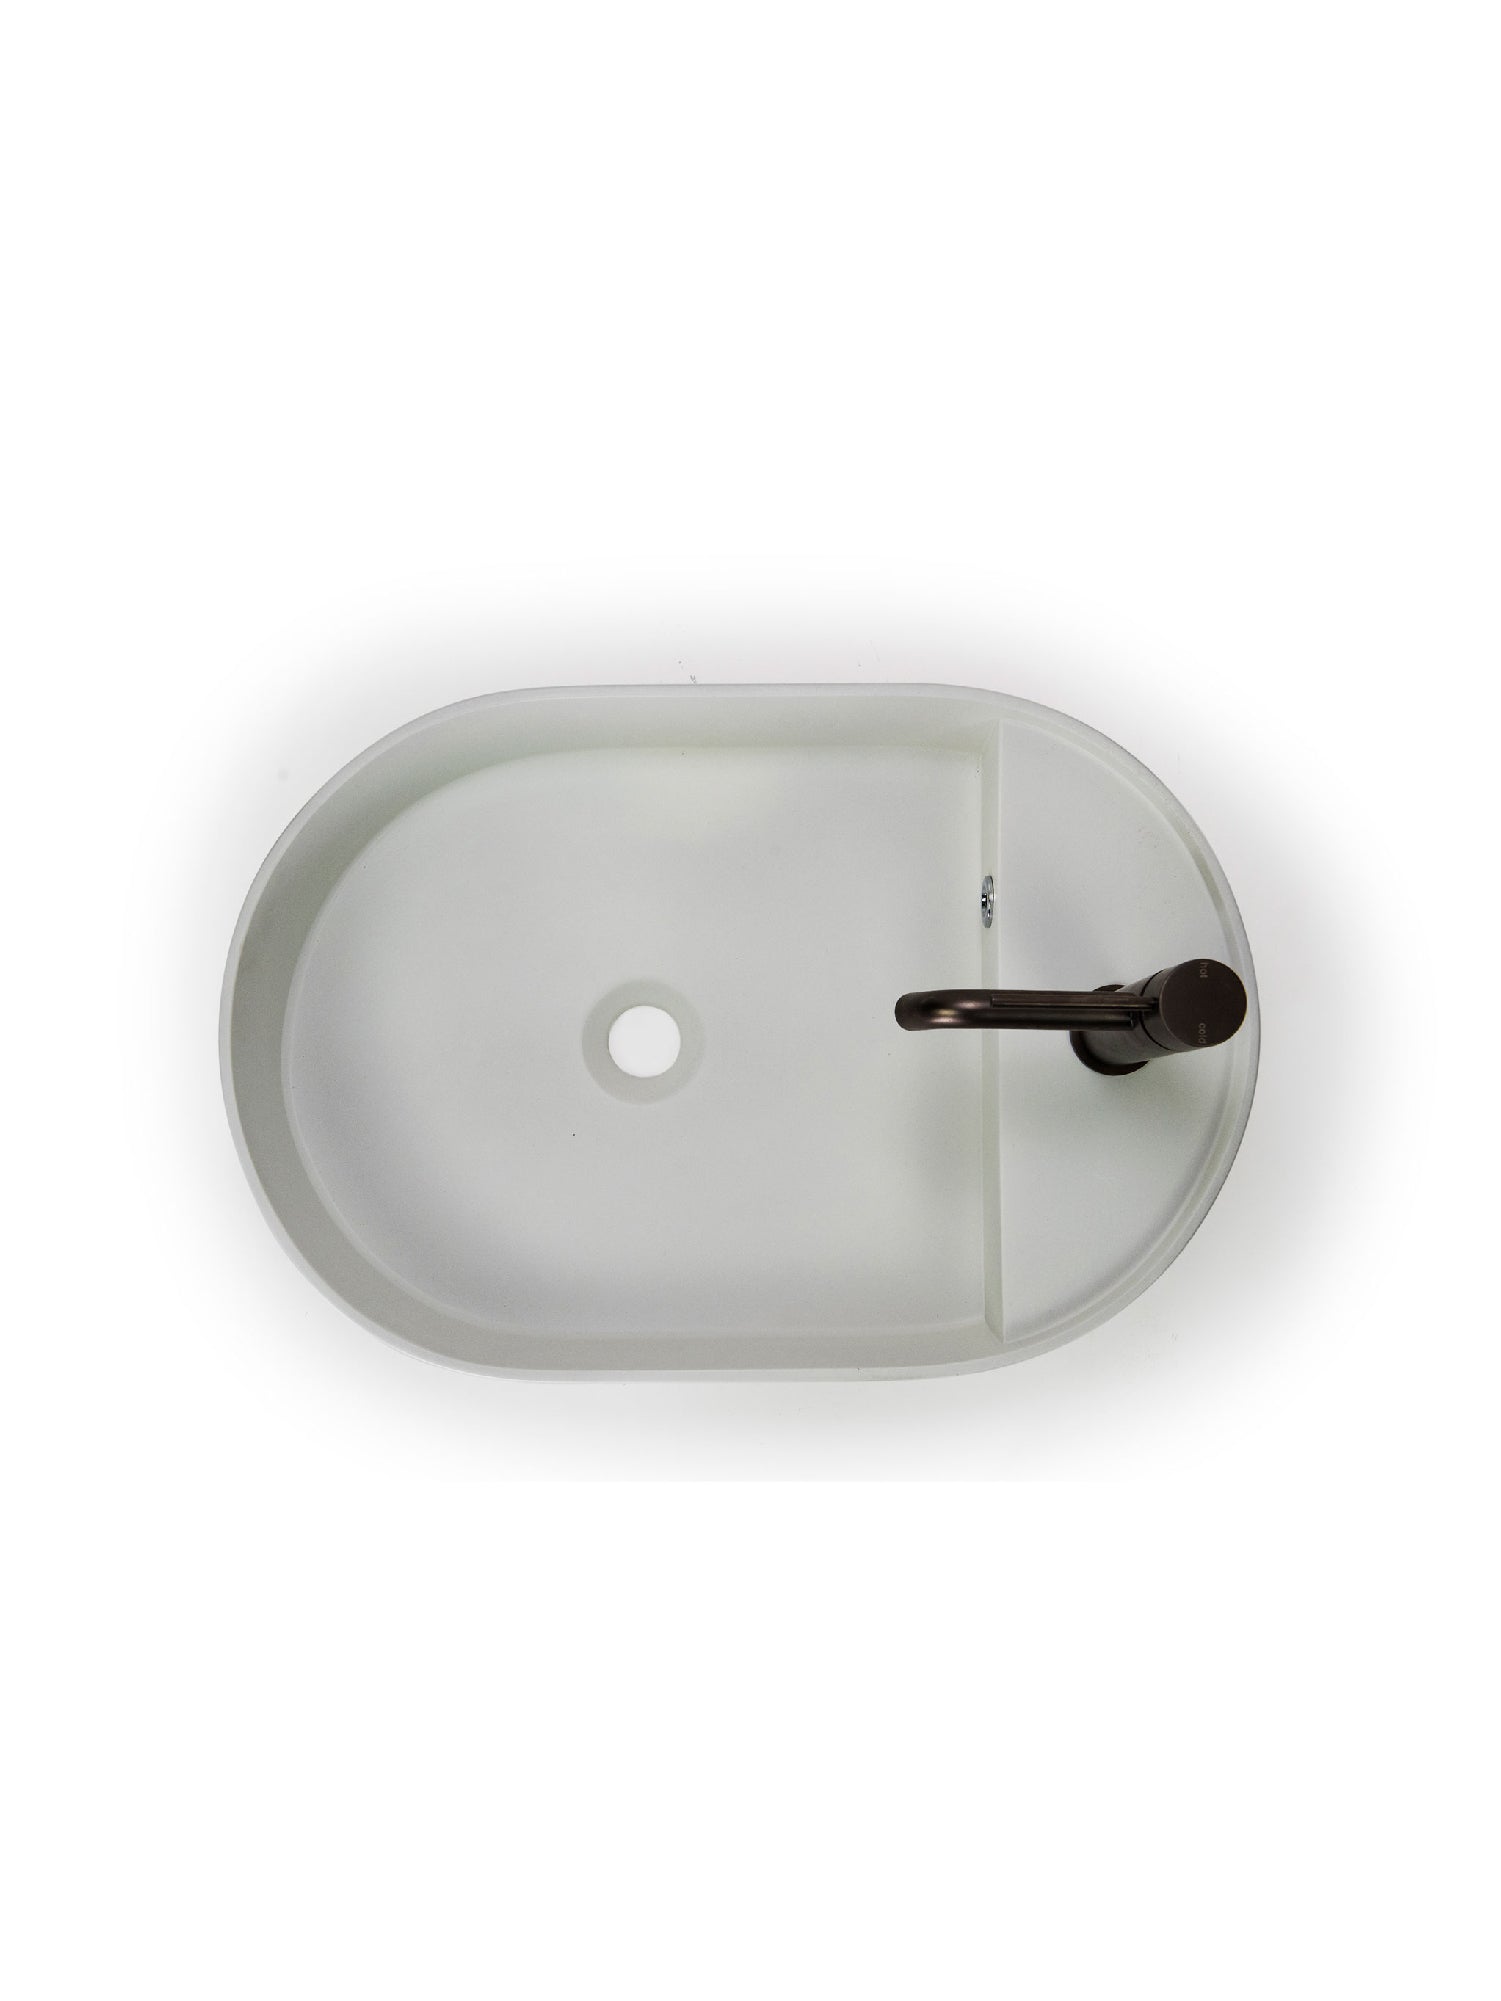 Shelf Oval Concrete Countertop Basin w/ Tap Hole & Overflow Kit (Avail. in 14 Colours)